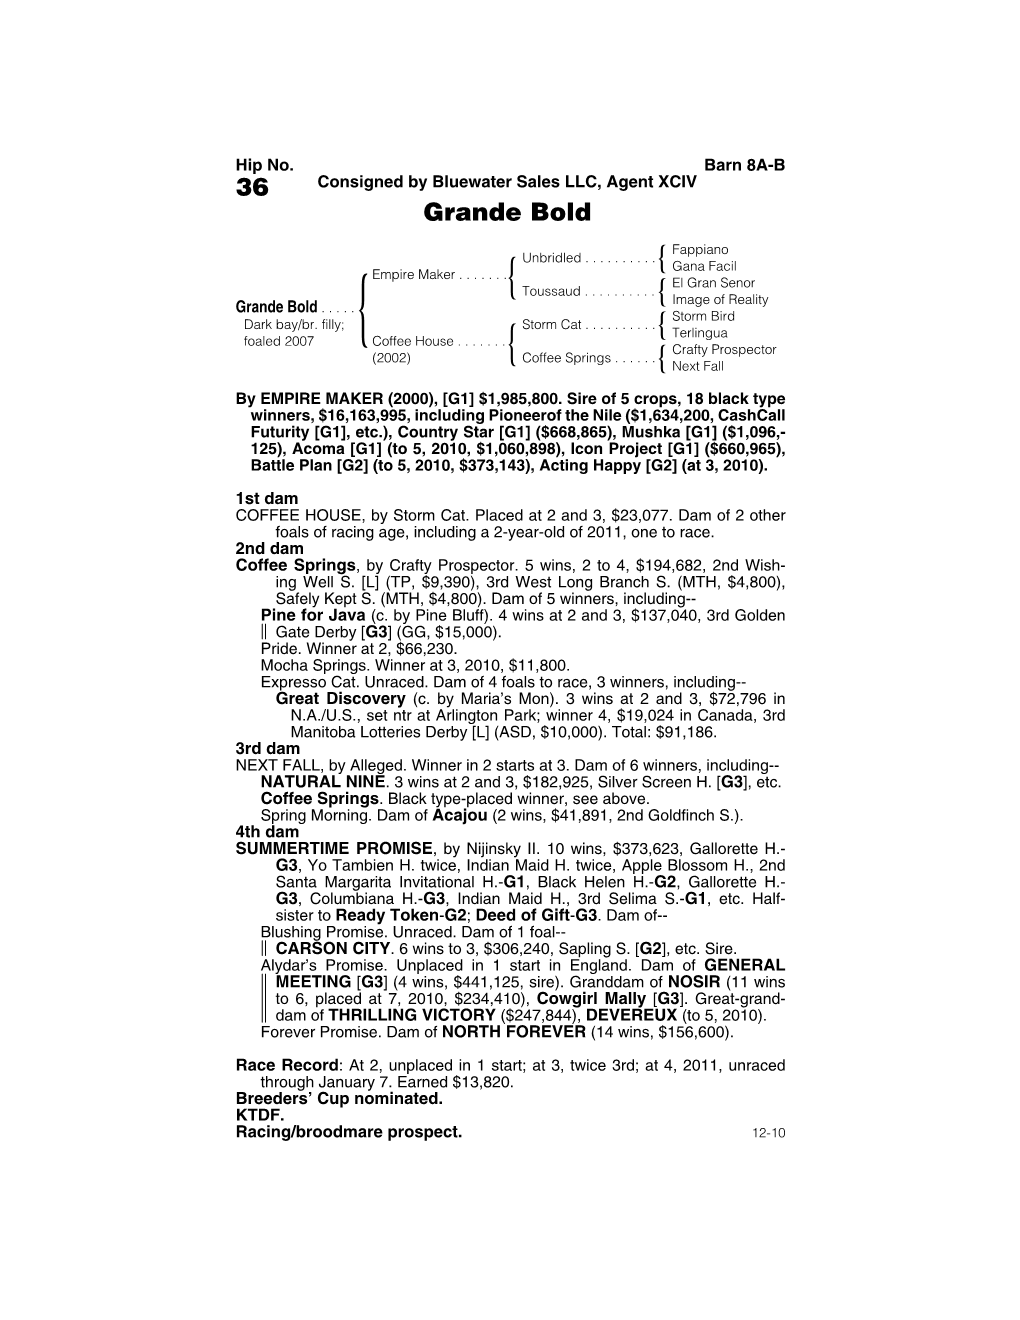 36 Consigned by Bluewater Sales LLC, Agent XCIV Grande Bold